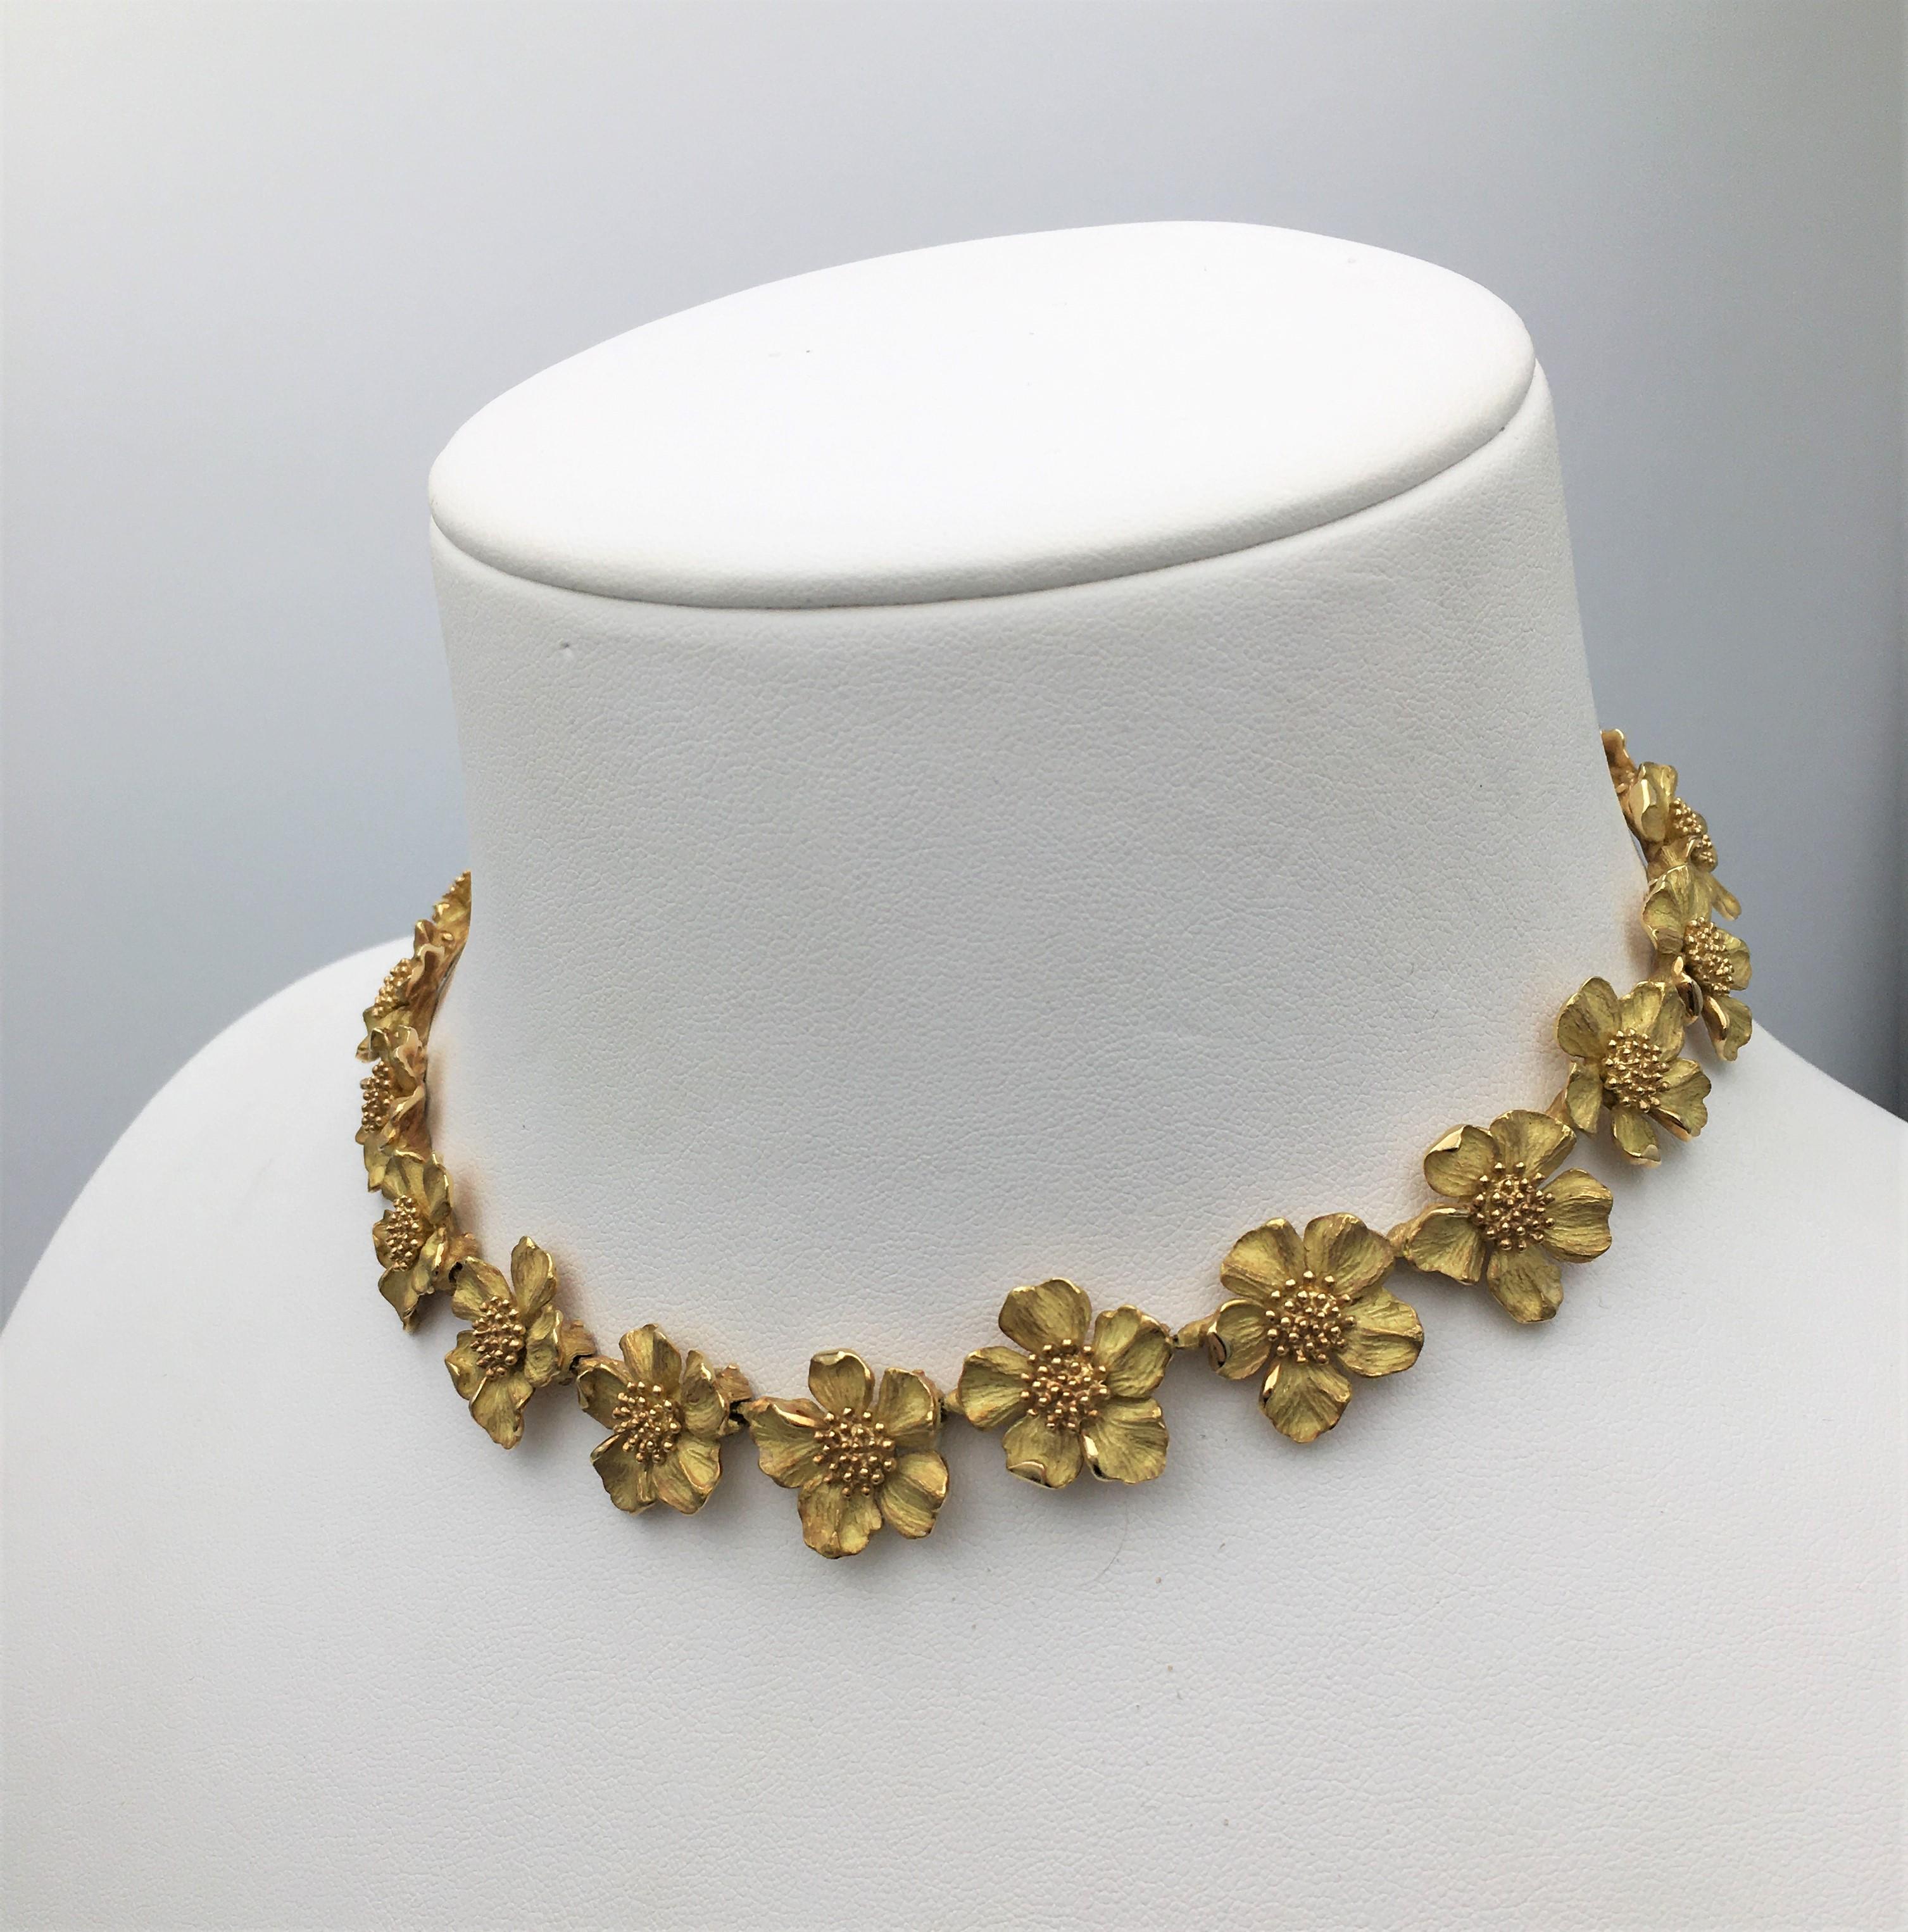 Authentic classic Tiffany & Co. Dogwood flower link necklace crafted in textured 18 karat yellow gold. Signed Tiffany & Co., Tiffany Classics, 750. The necklace measures 16 inches in length. Presented with original pouch, no box or papers. CIRCA